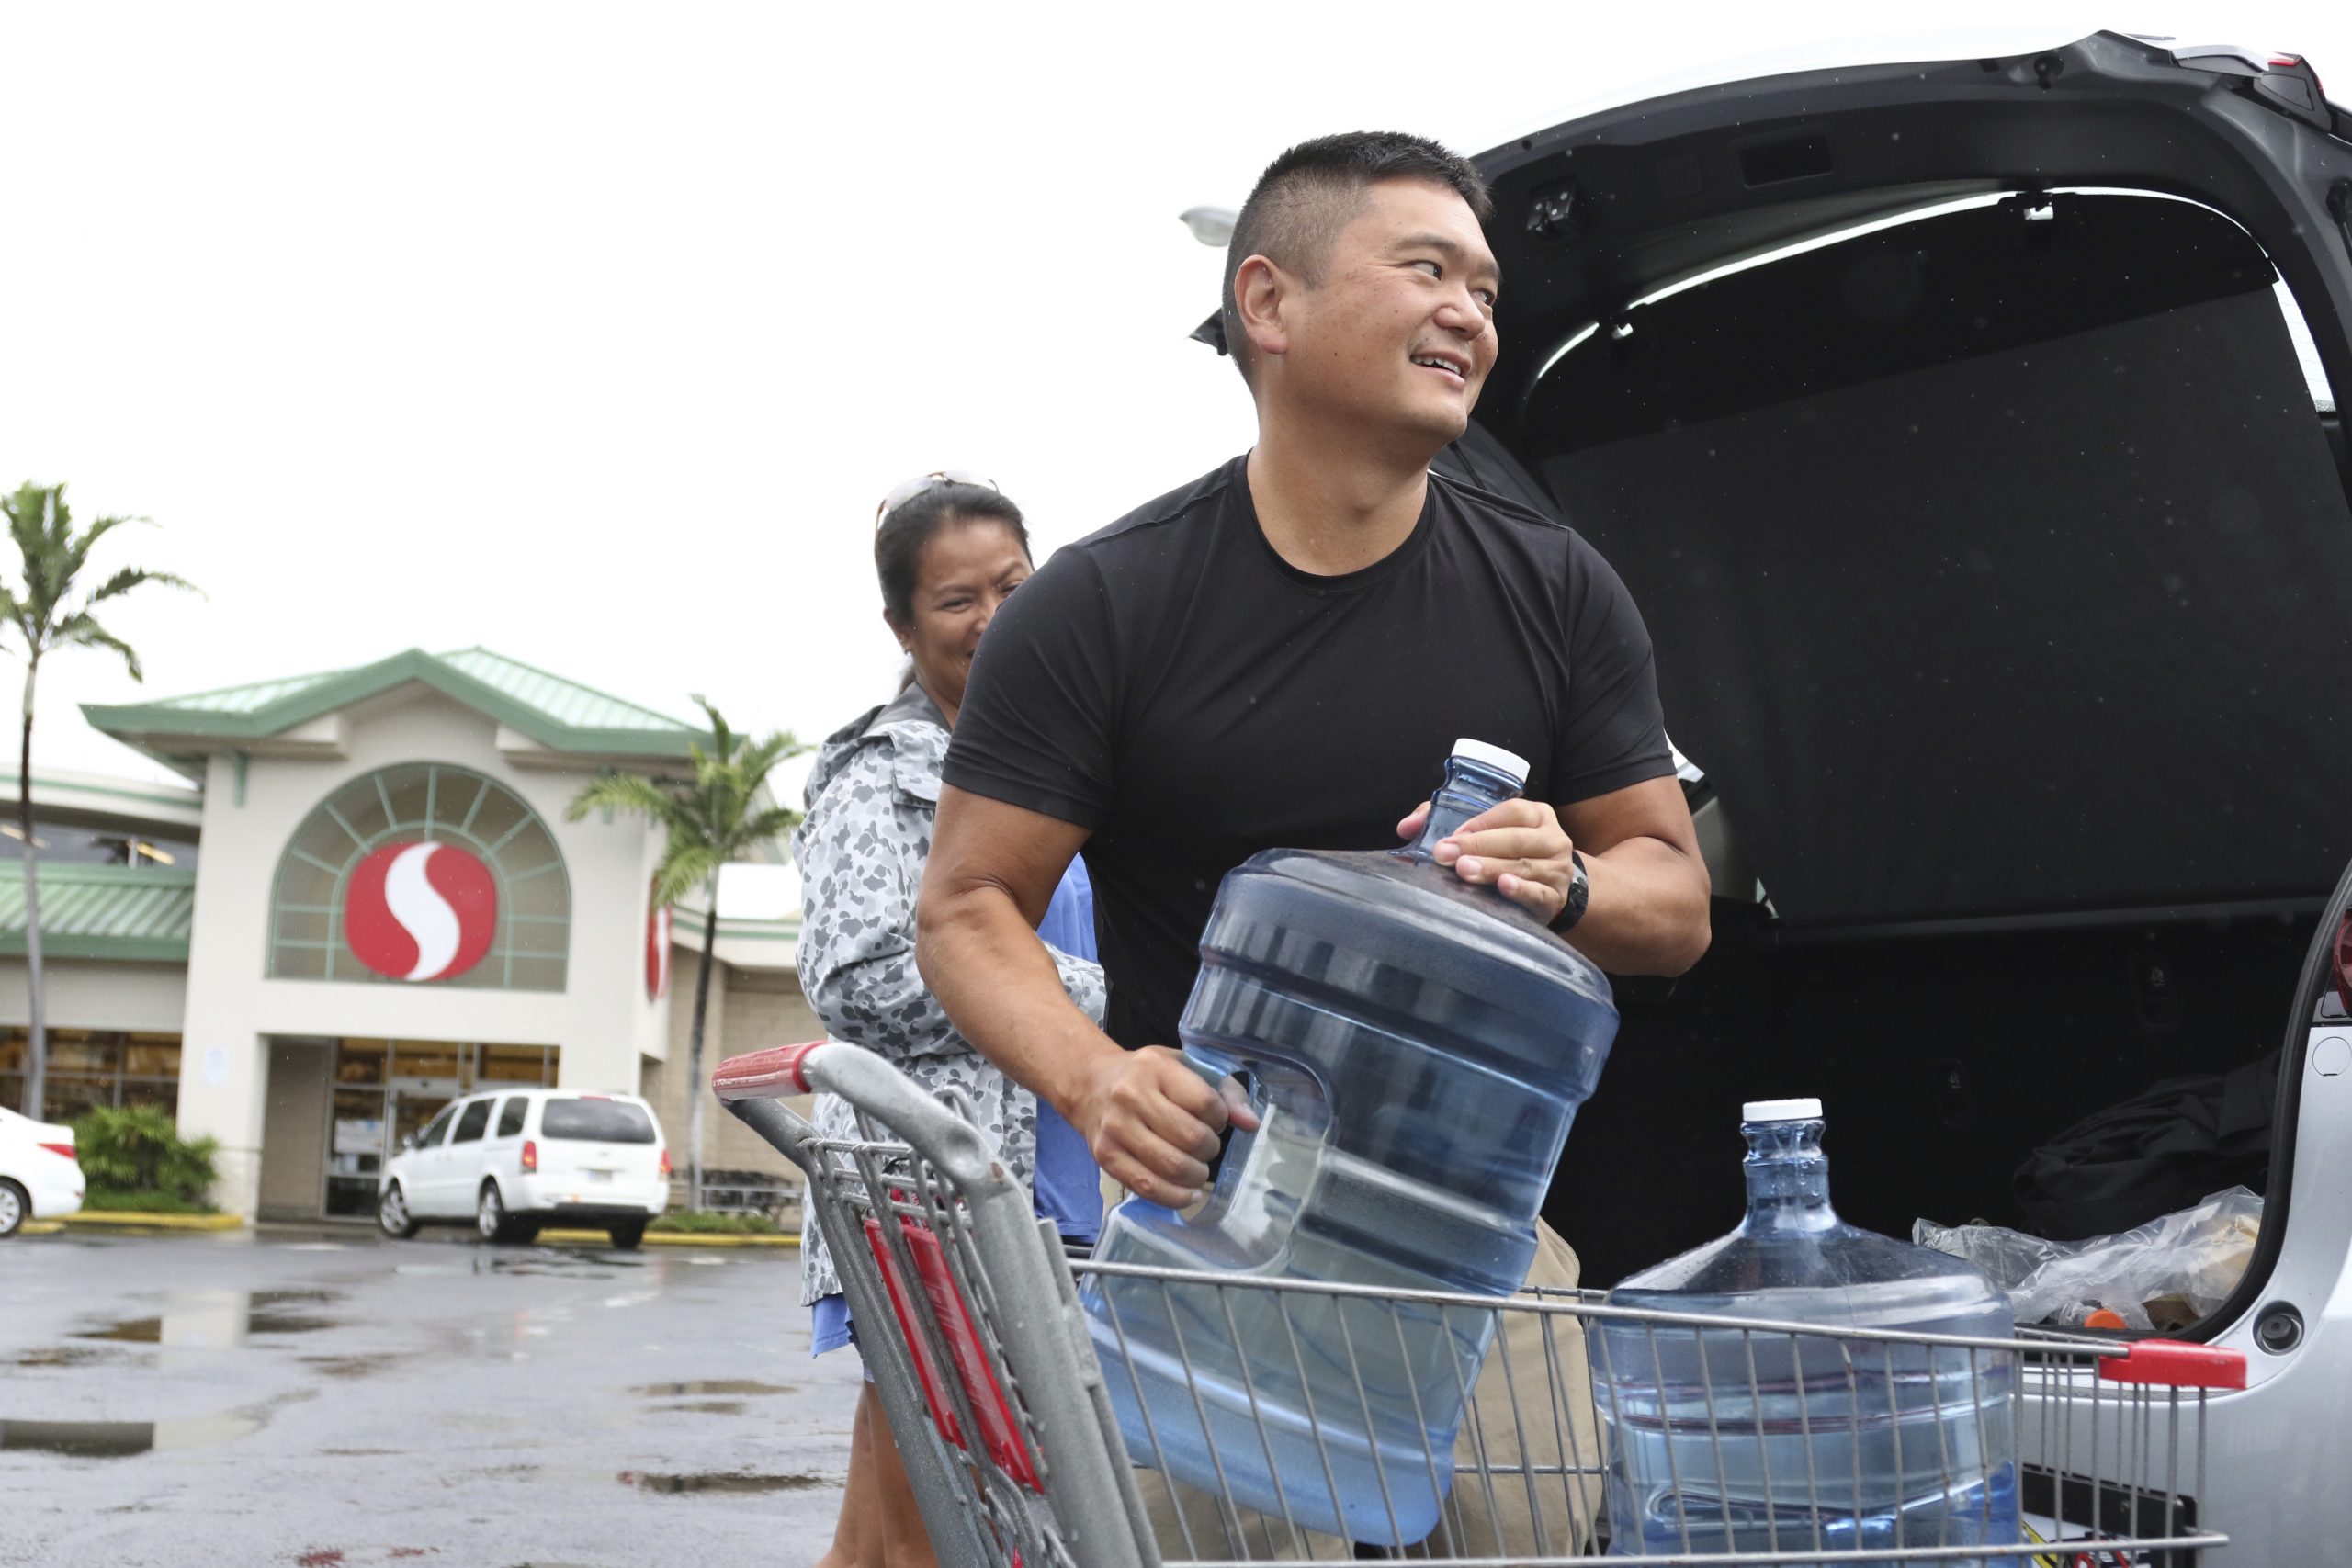 Check your bottled water supply now, as hurricane season begins